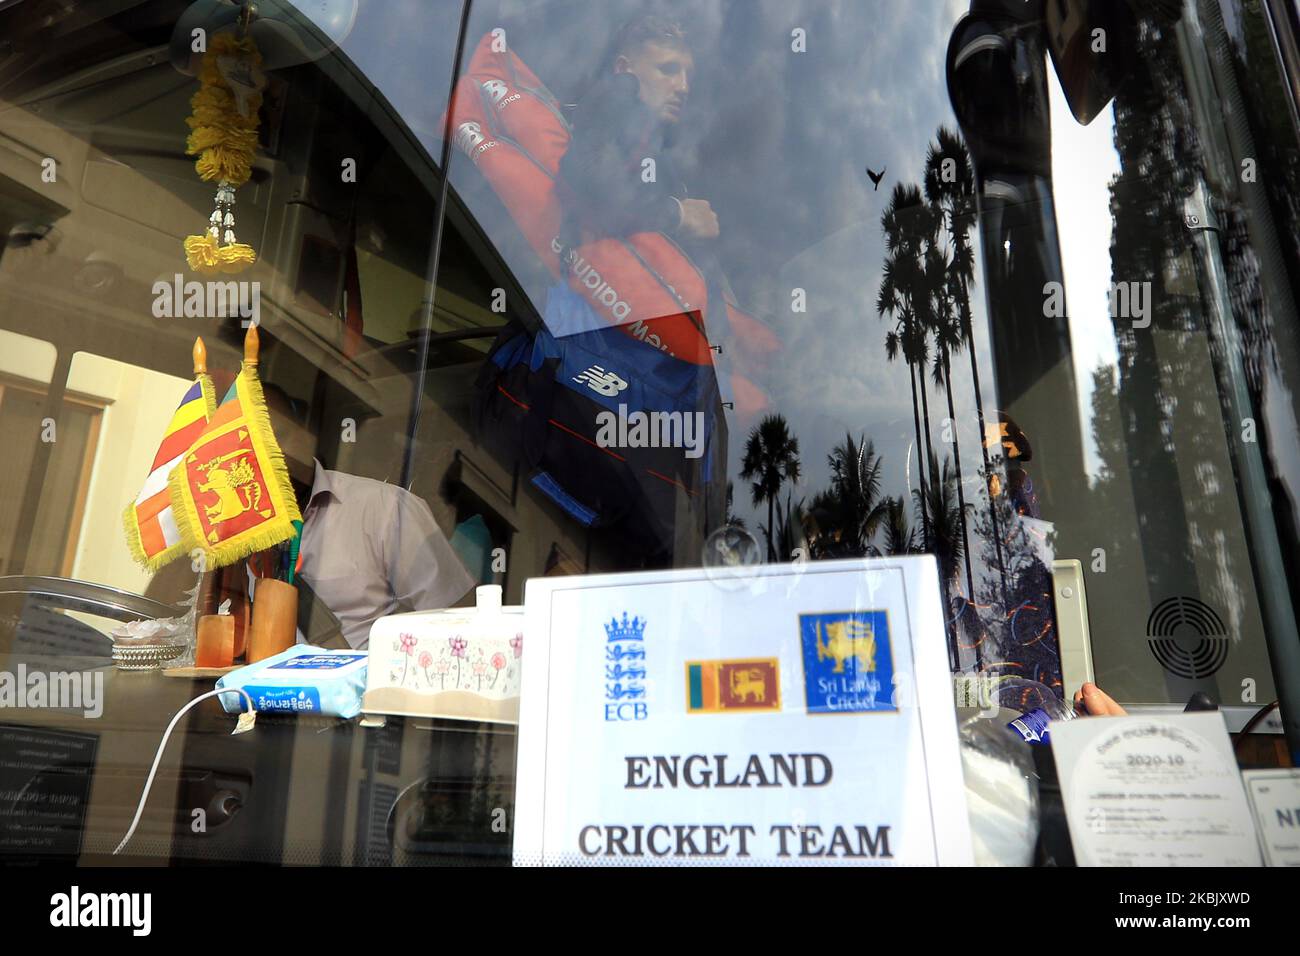 England cricket team's captain Joe Root is seen through the reflection on the front windshield glass after getting in to the bus following the the 2nd practice cricket match between Sri Lanka's Board President's XI and England cricket team at P Sara Oval was canceled on March 13, 2020 in Colombo, Sri Lanka. England cricket team's tour of Sri Lanka was officially called off due to the global spread of the coronavirus. The decision was announced by the England and Wales Cricket Board and their Sri Lankan counterparts on Friday morning while Joe Root’s players were out in the middle playing the s Stock Photo